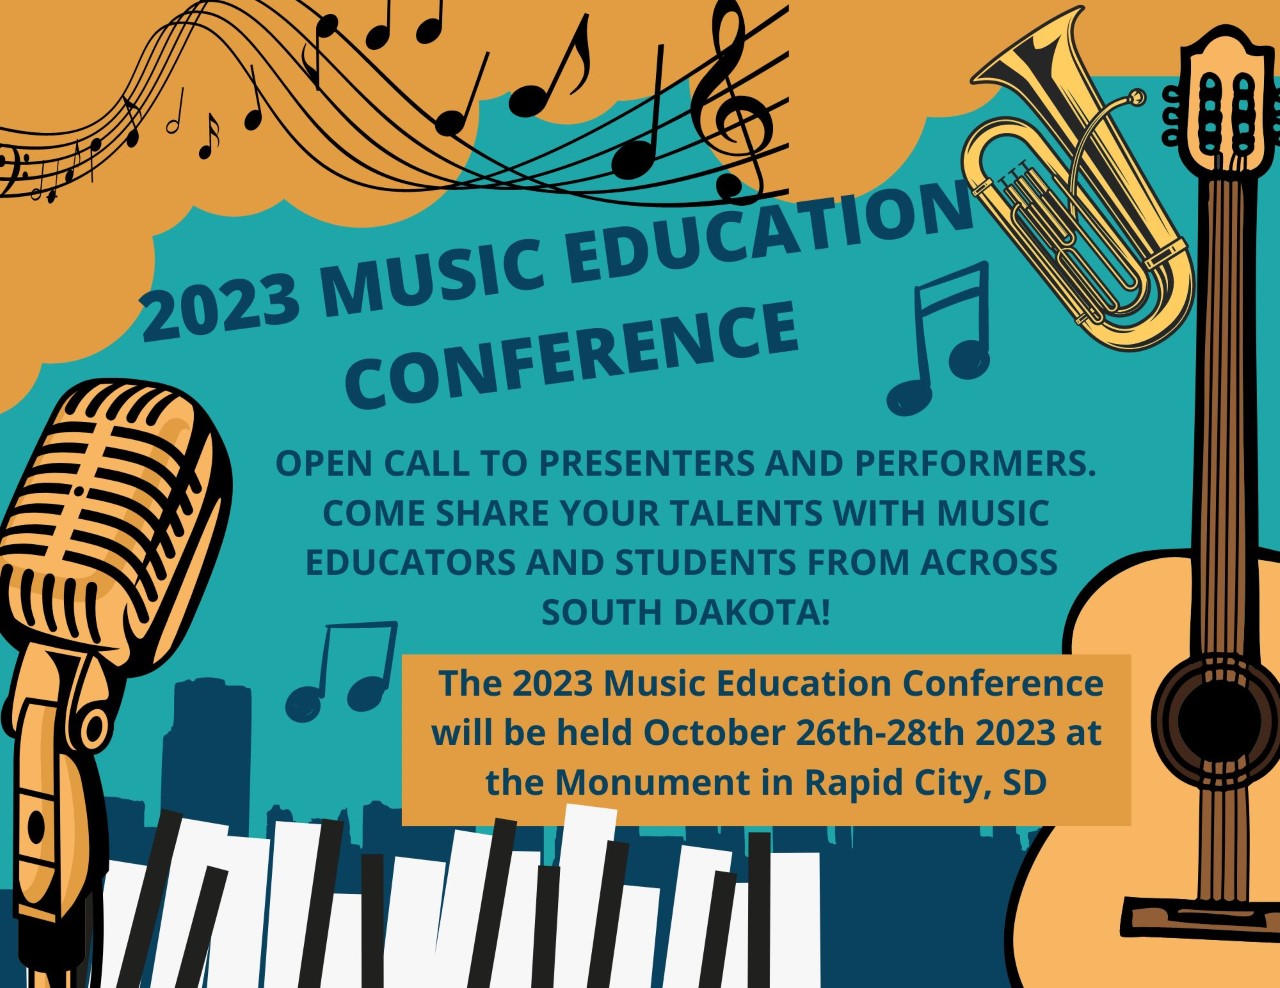 thumbnail_Open call to presenters and performers. Come share your talents with music educators and students from across South Dakota! The 2023 Music Education Conference will be held October 26th-28th 2023 at the Mon.jpg